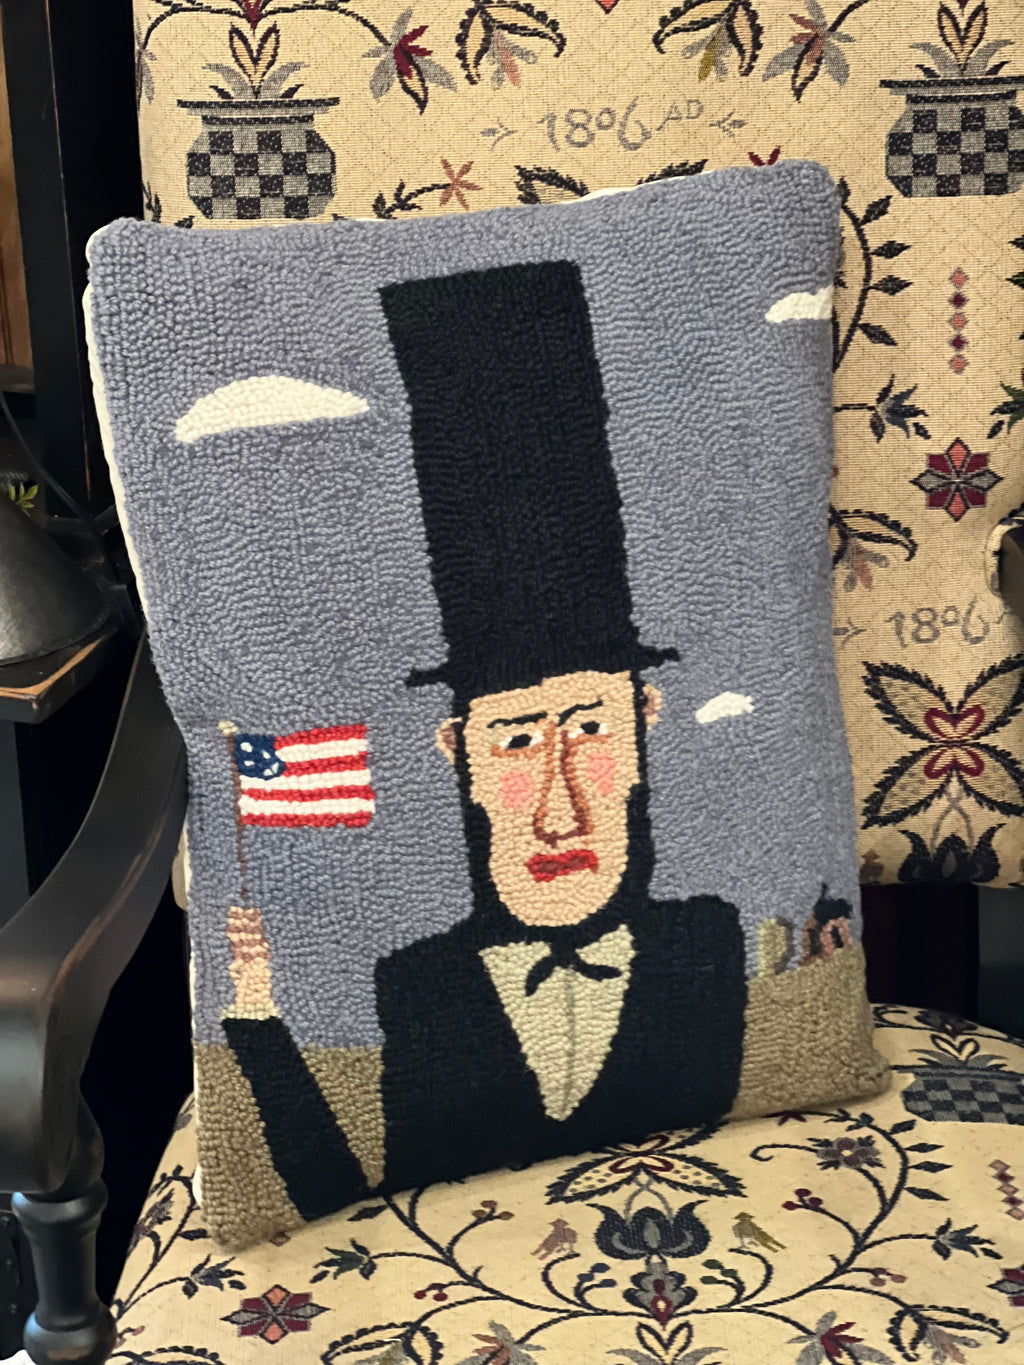 Abraham Lincoln Hooked Pillow